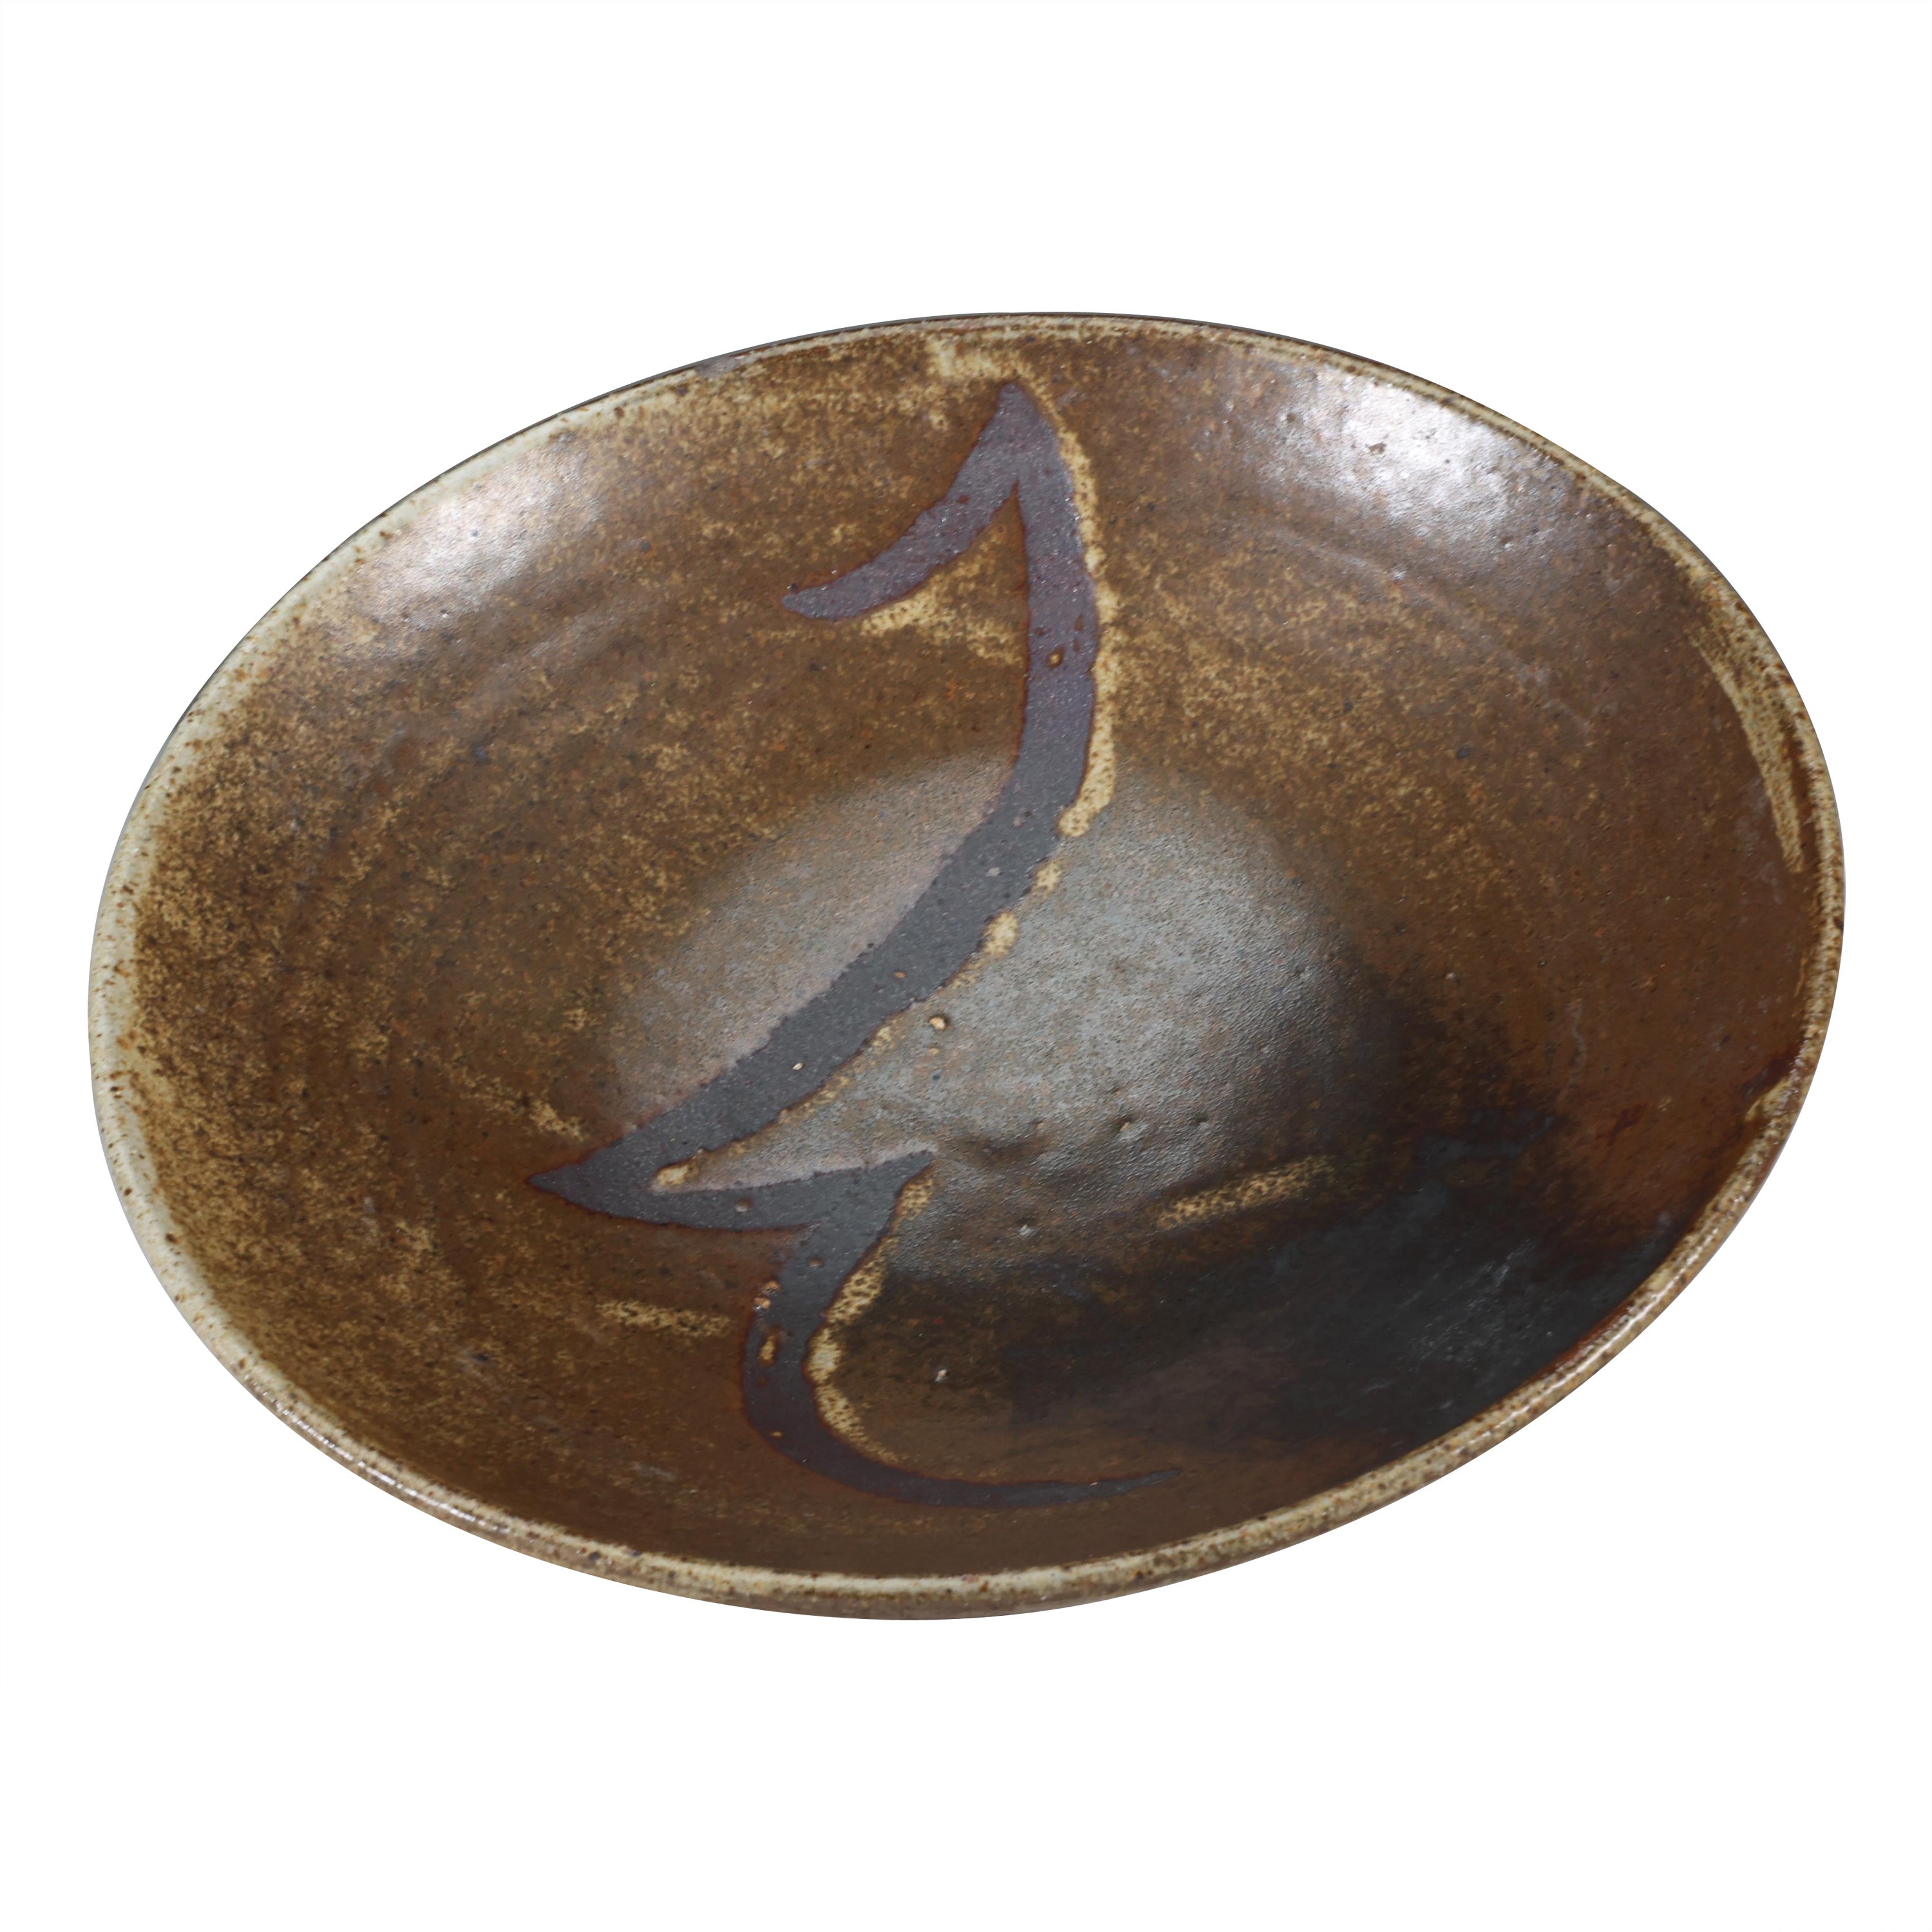 Bernard Leach attr St Ives Pottery. A Japanese inspired reduced stoneware bowl. For Sale